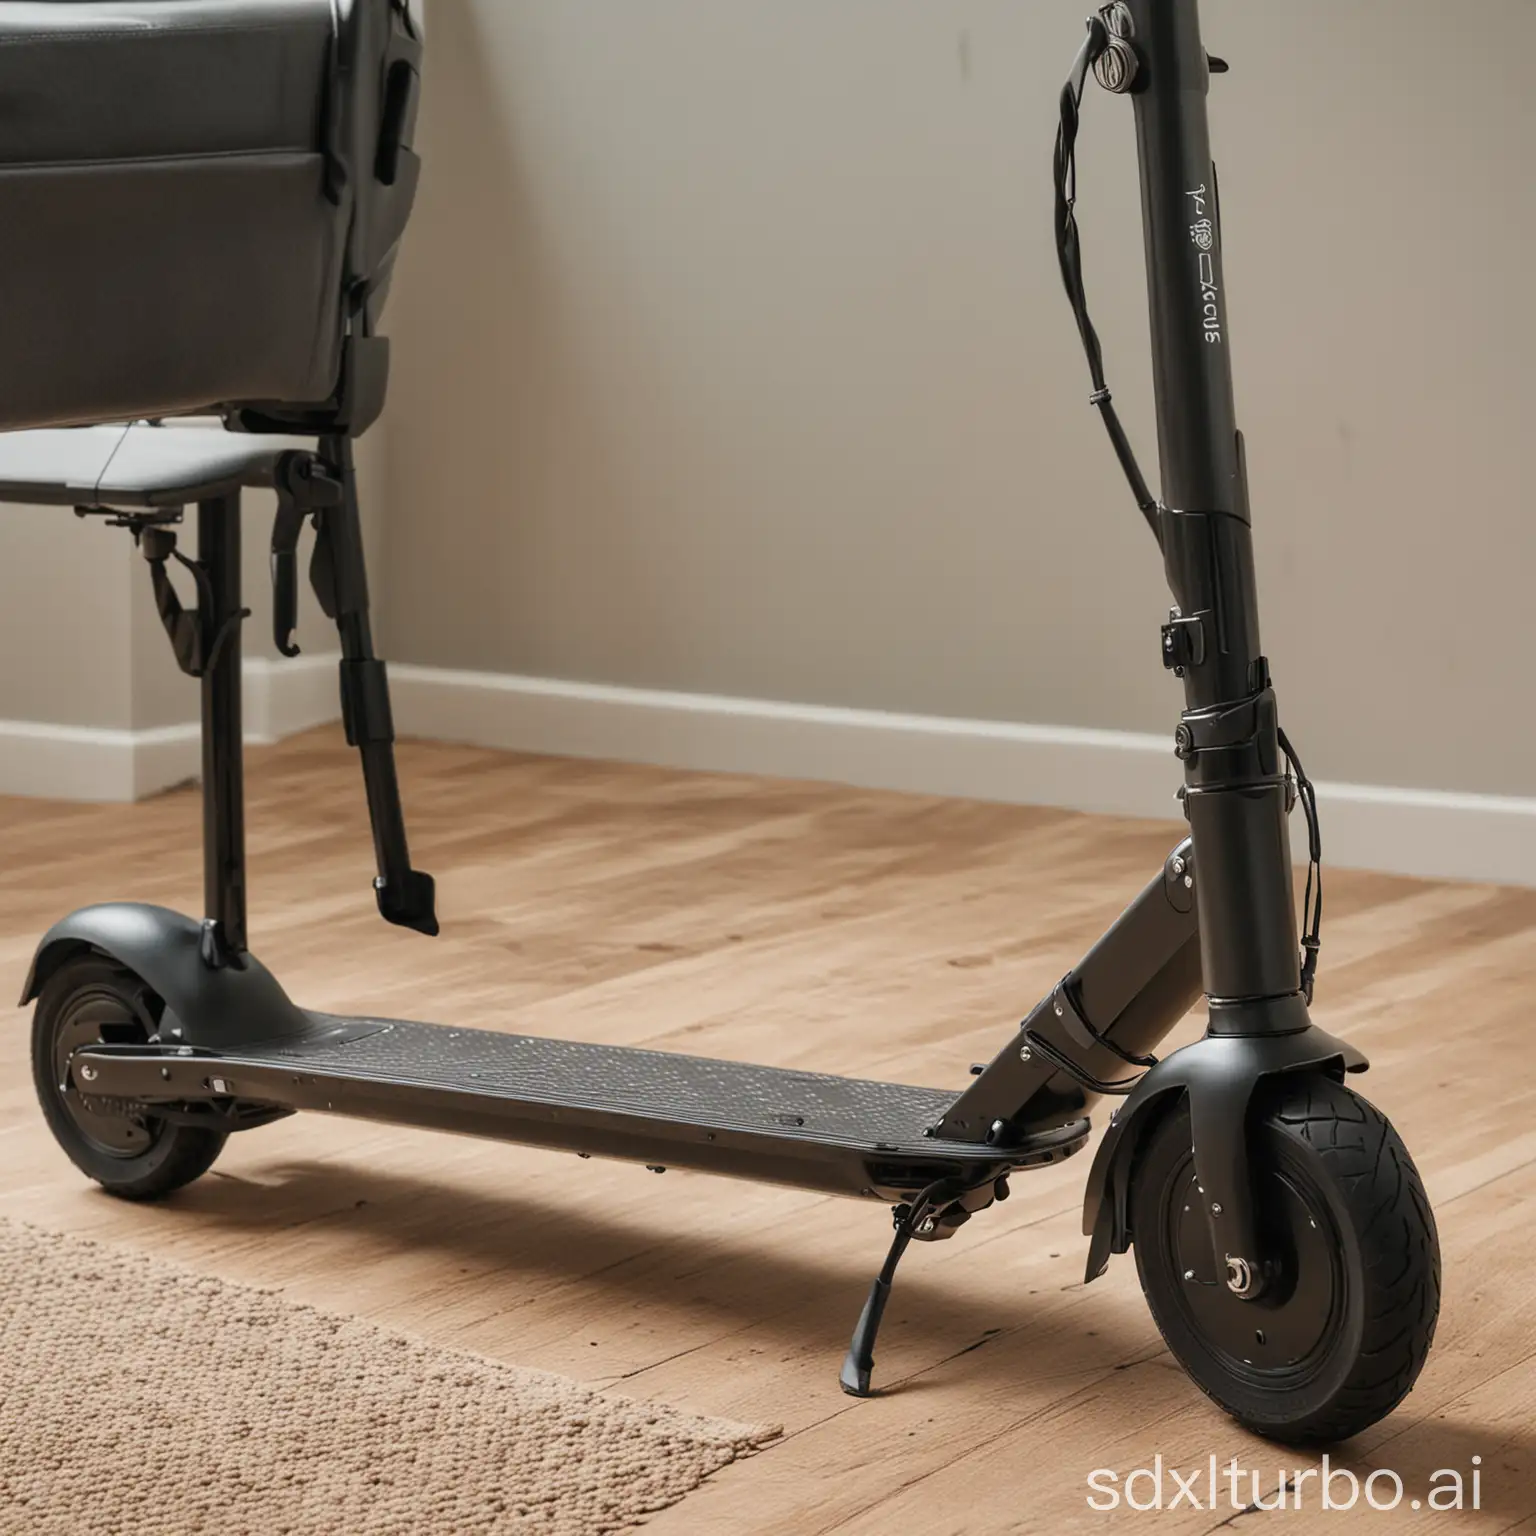 Sleek-and-Stylish-Mobility-Scooter-in-Home-Interior